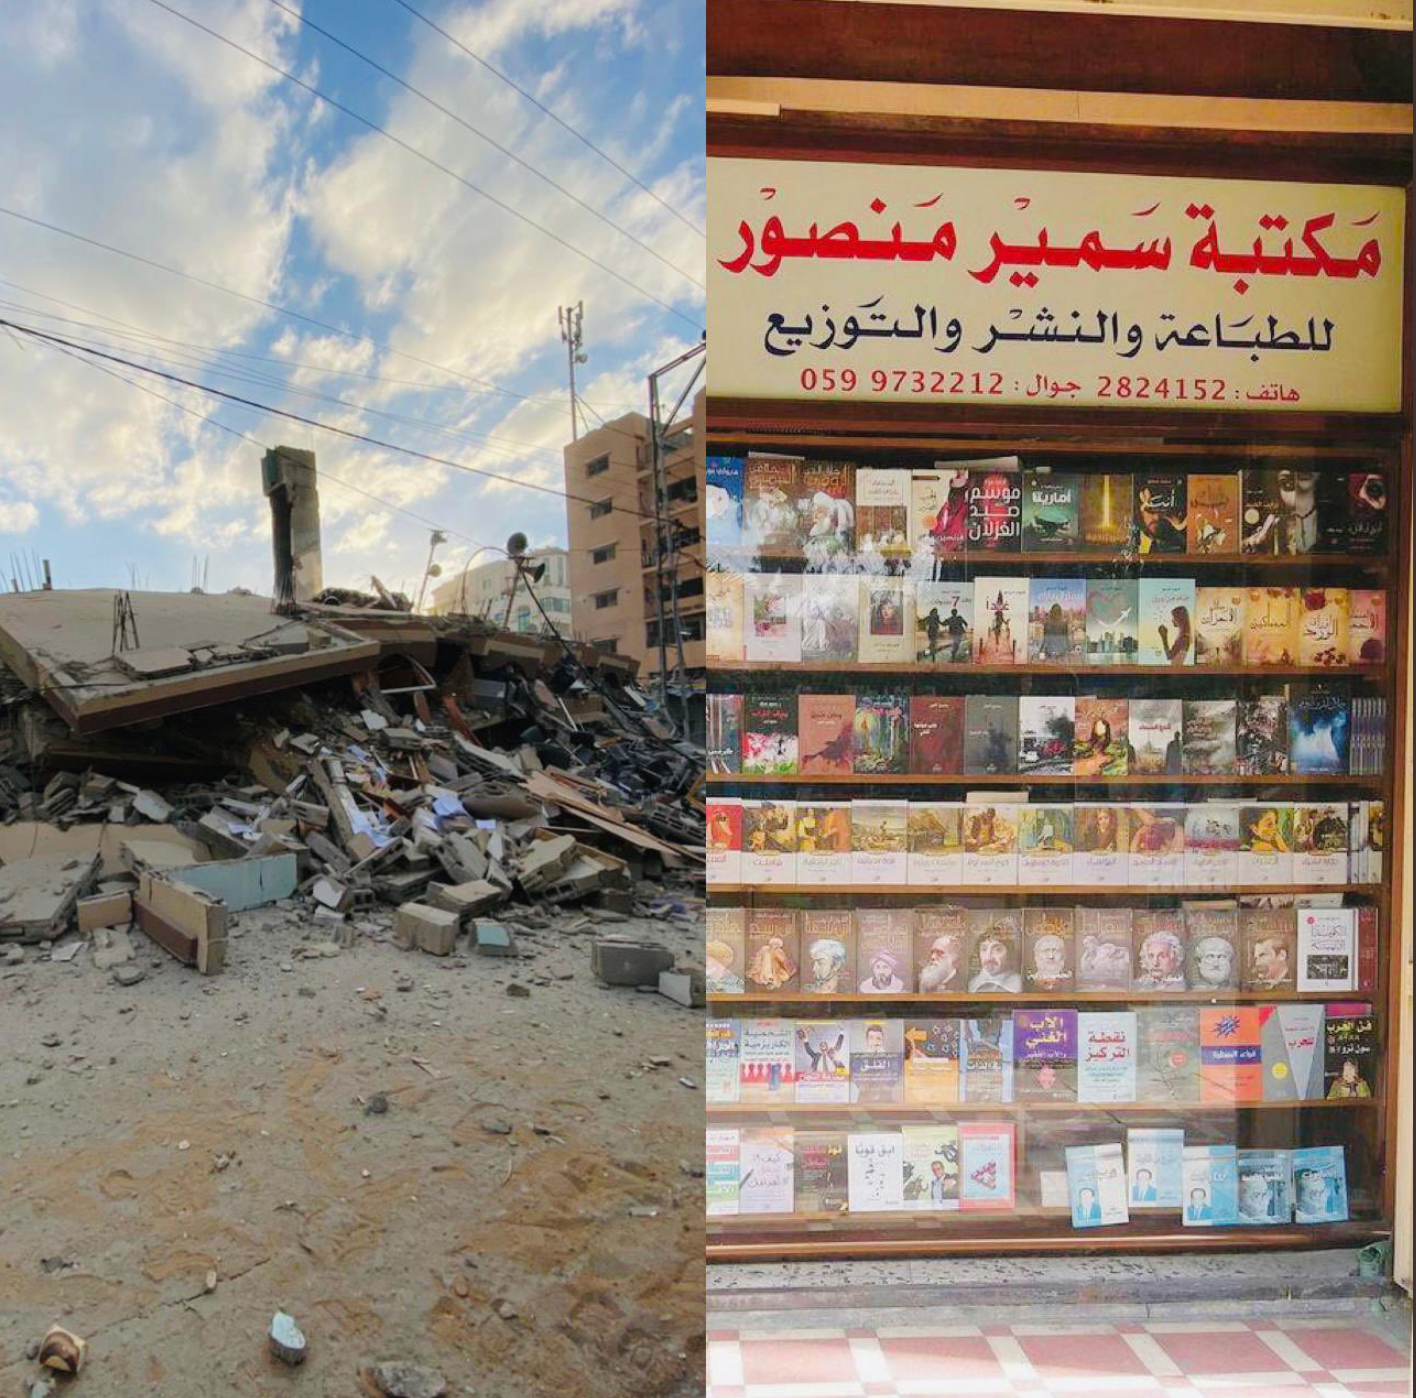 Samir Mansour Bookshop in Gaza, Before and After Israeli attack, May 18, 2021